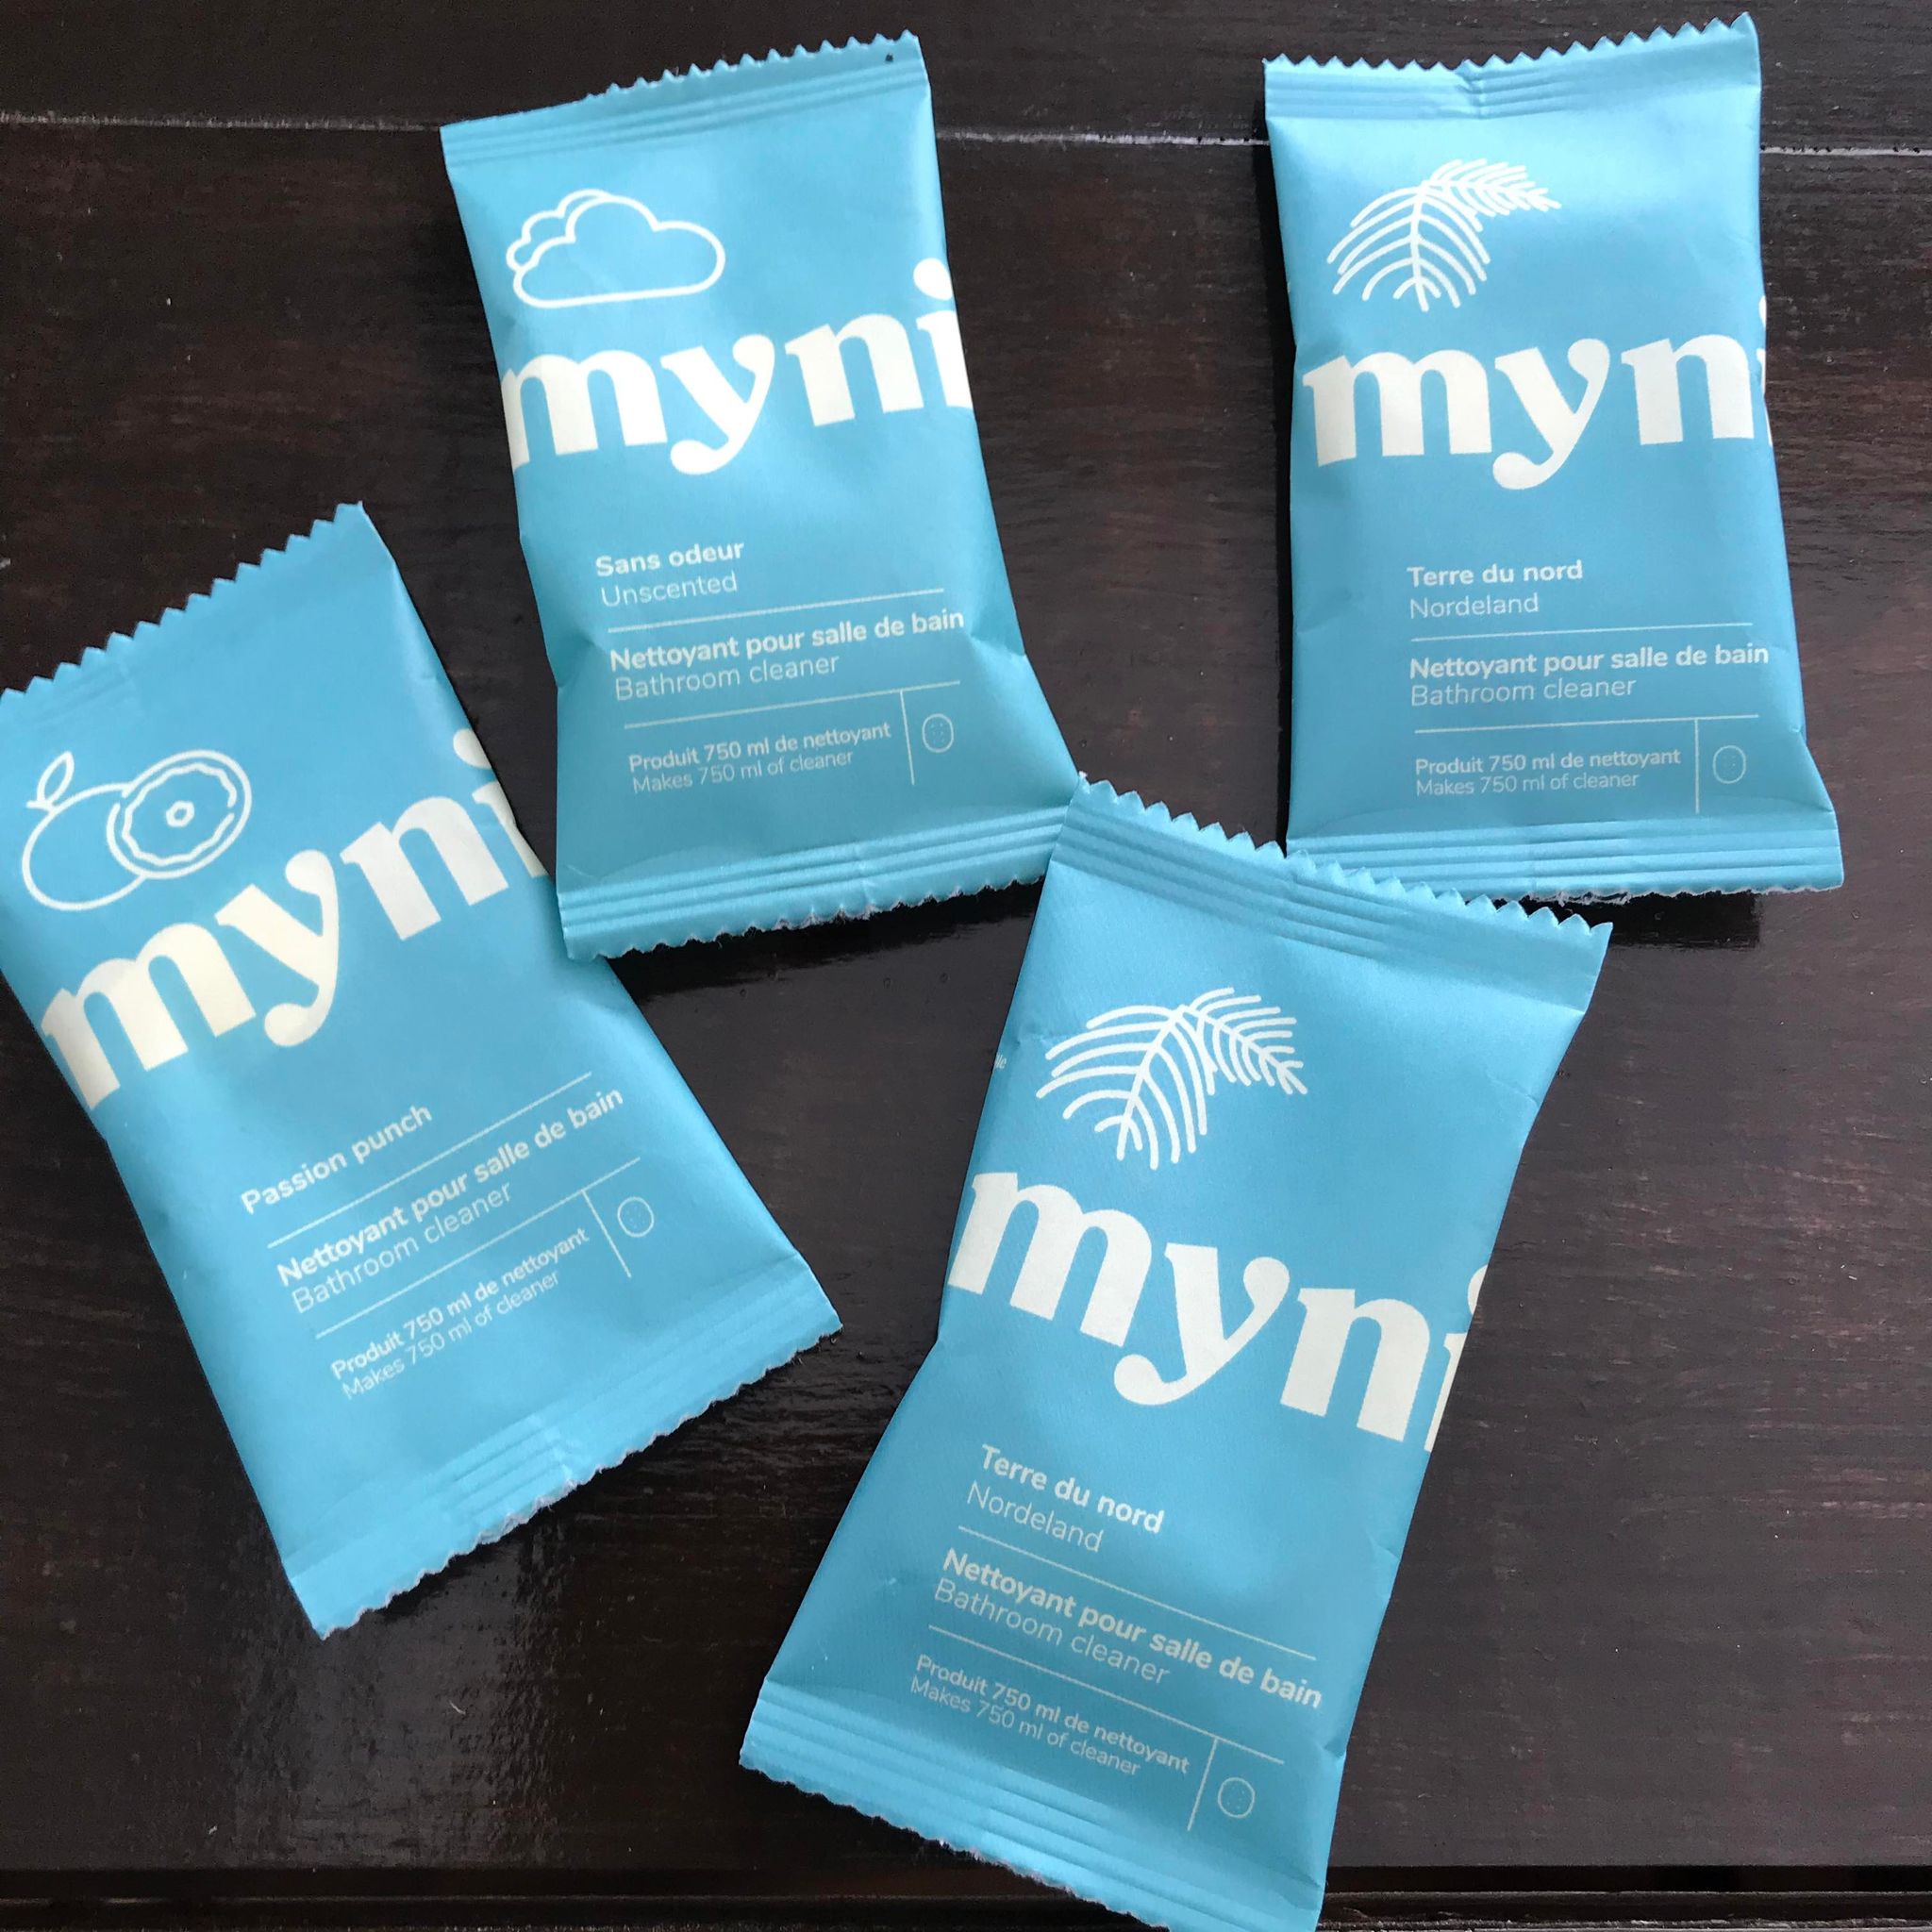 Bathroom cleaning concentrate tablets made in canada by myni and available in unscented as well as scented options - Norderland (black spruce), Zest Fest (lemon mint) and Passion Punch (grapefruit mango) scents in compostable pouches